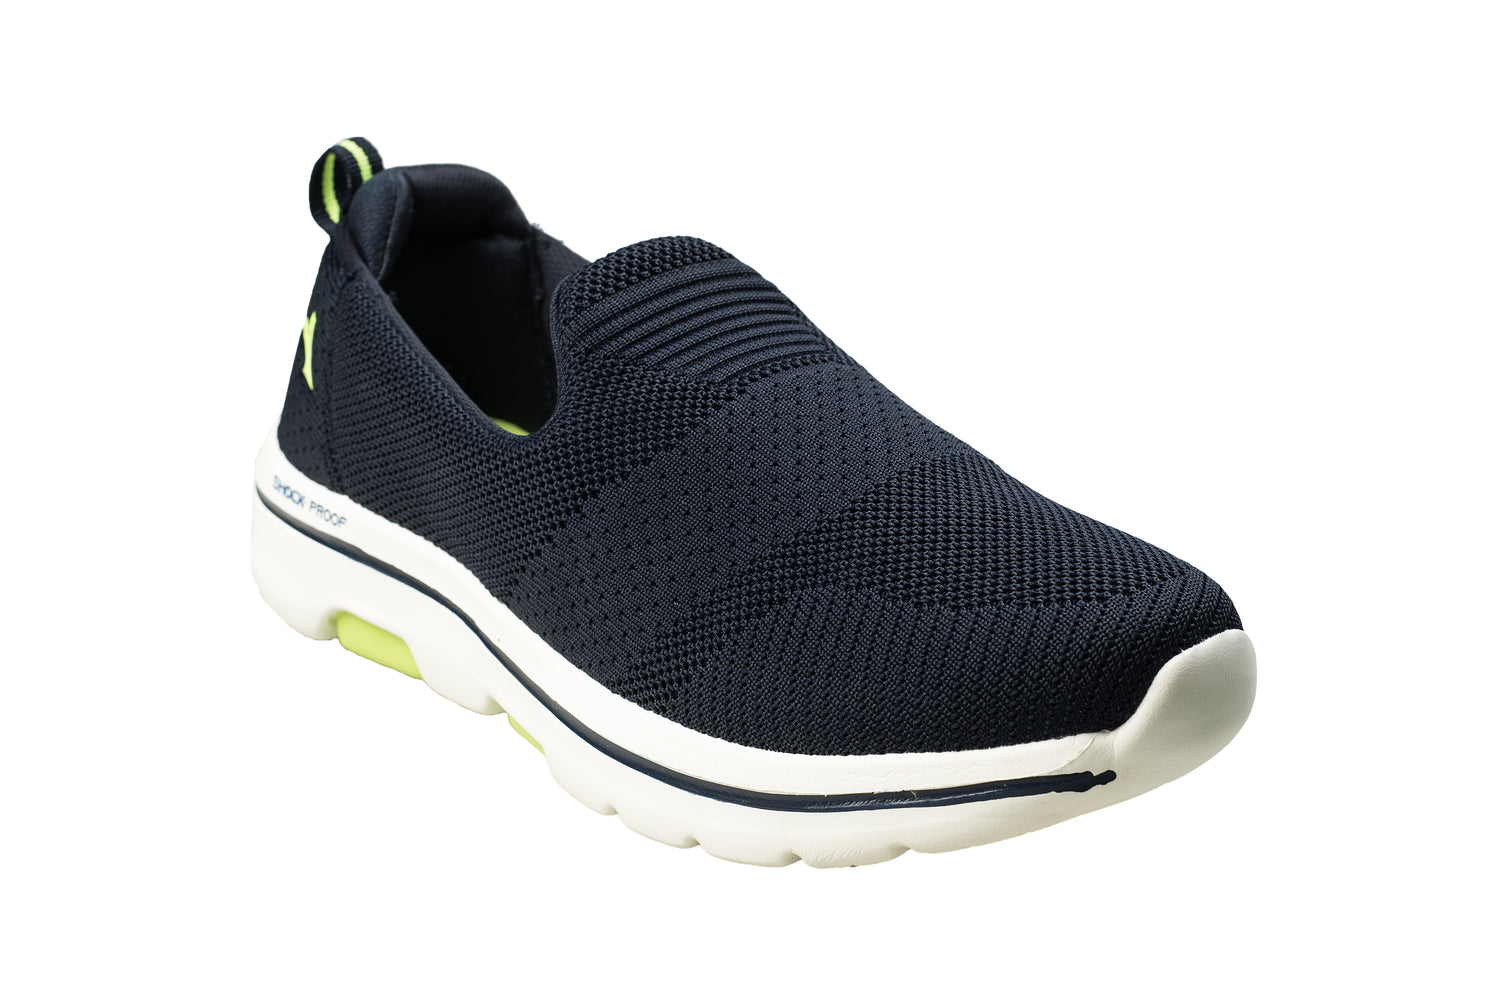 Abros Gents Navy / P. Green Sports Shoe